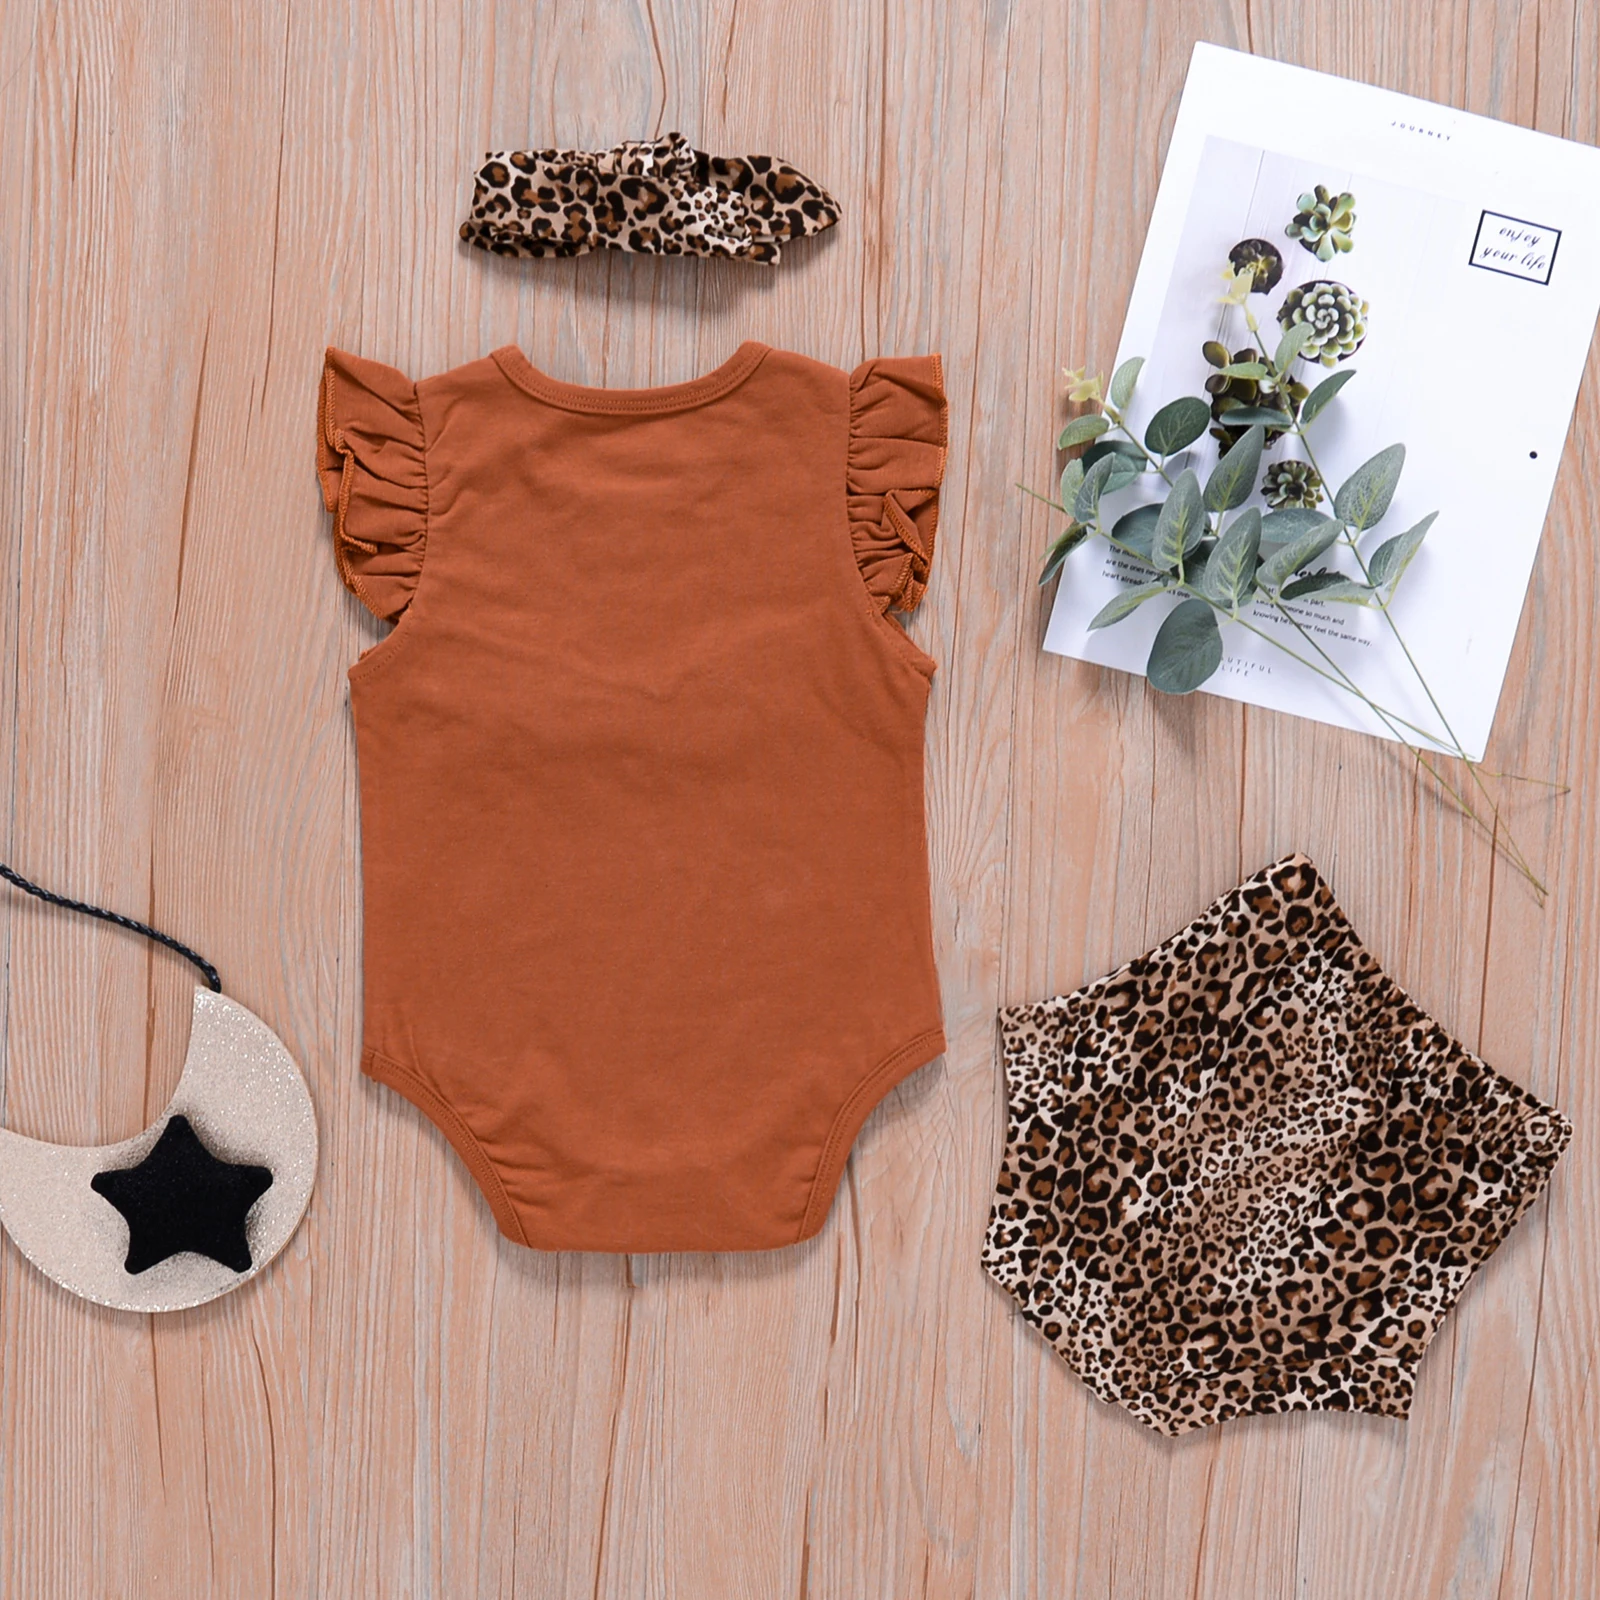 

Pudcoco 2021 Summer 0-24M Baby Girl 3Pcs Set Brown Ruffled Buttons Flared Short Sleeve Bodysuit+Leopard Shorts+Bow Clothes